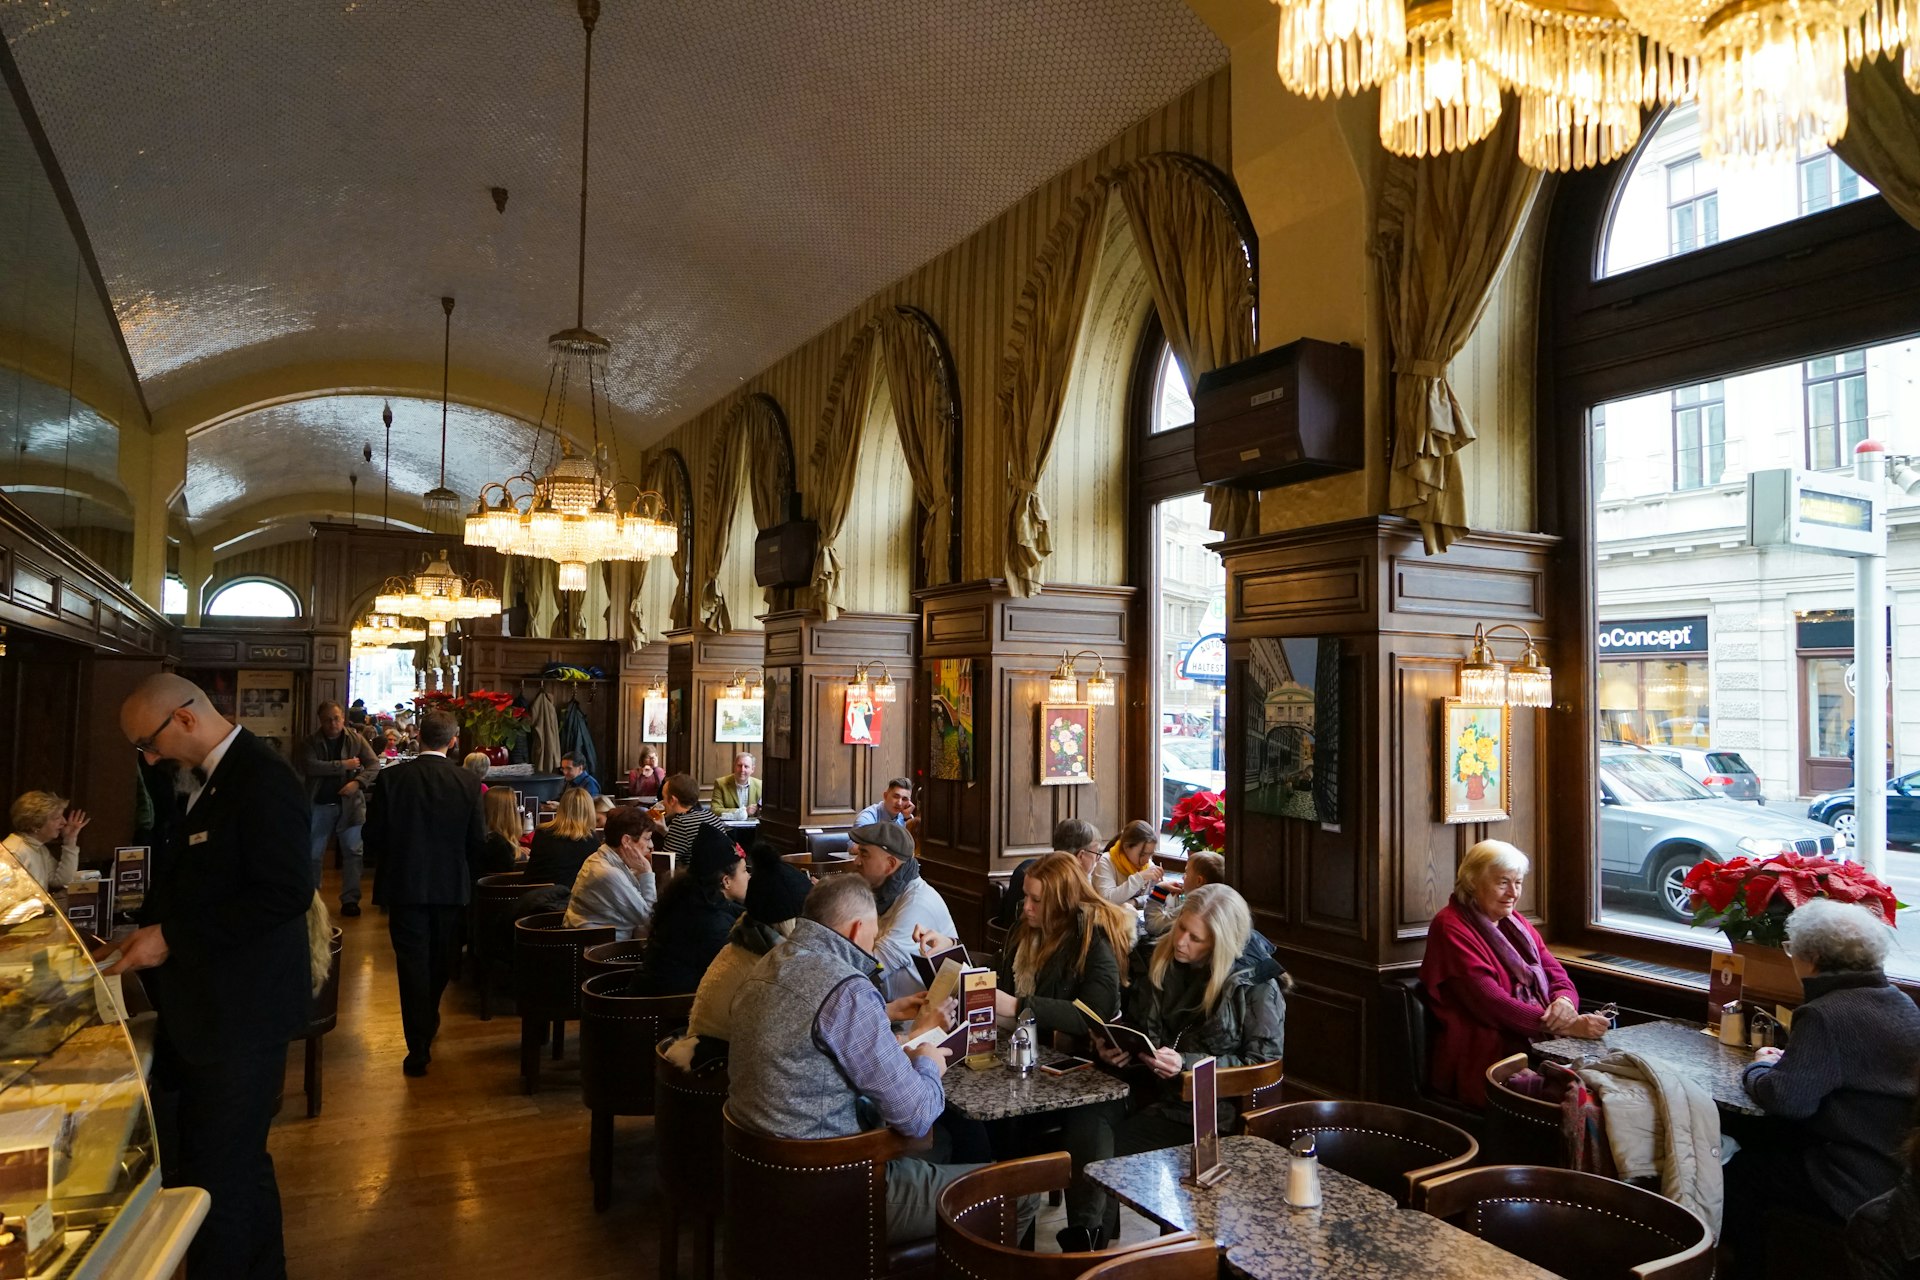 People sipping coffee in Cafe Schwarzenberg in Vienna